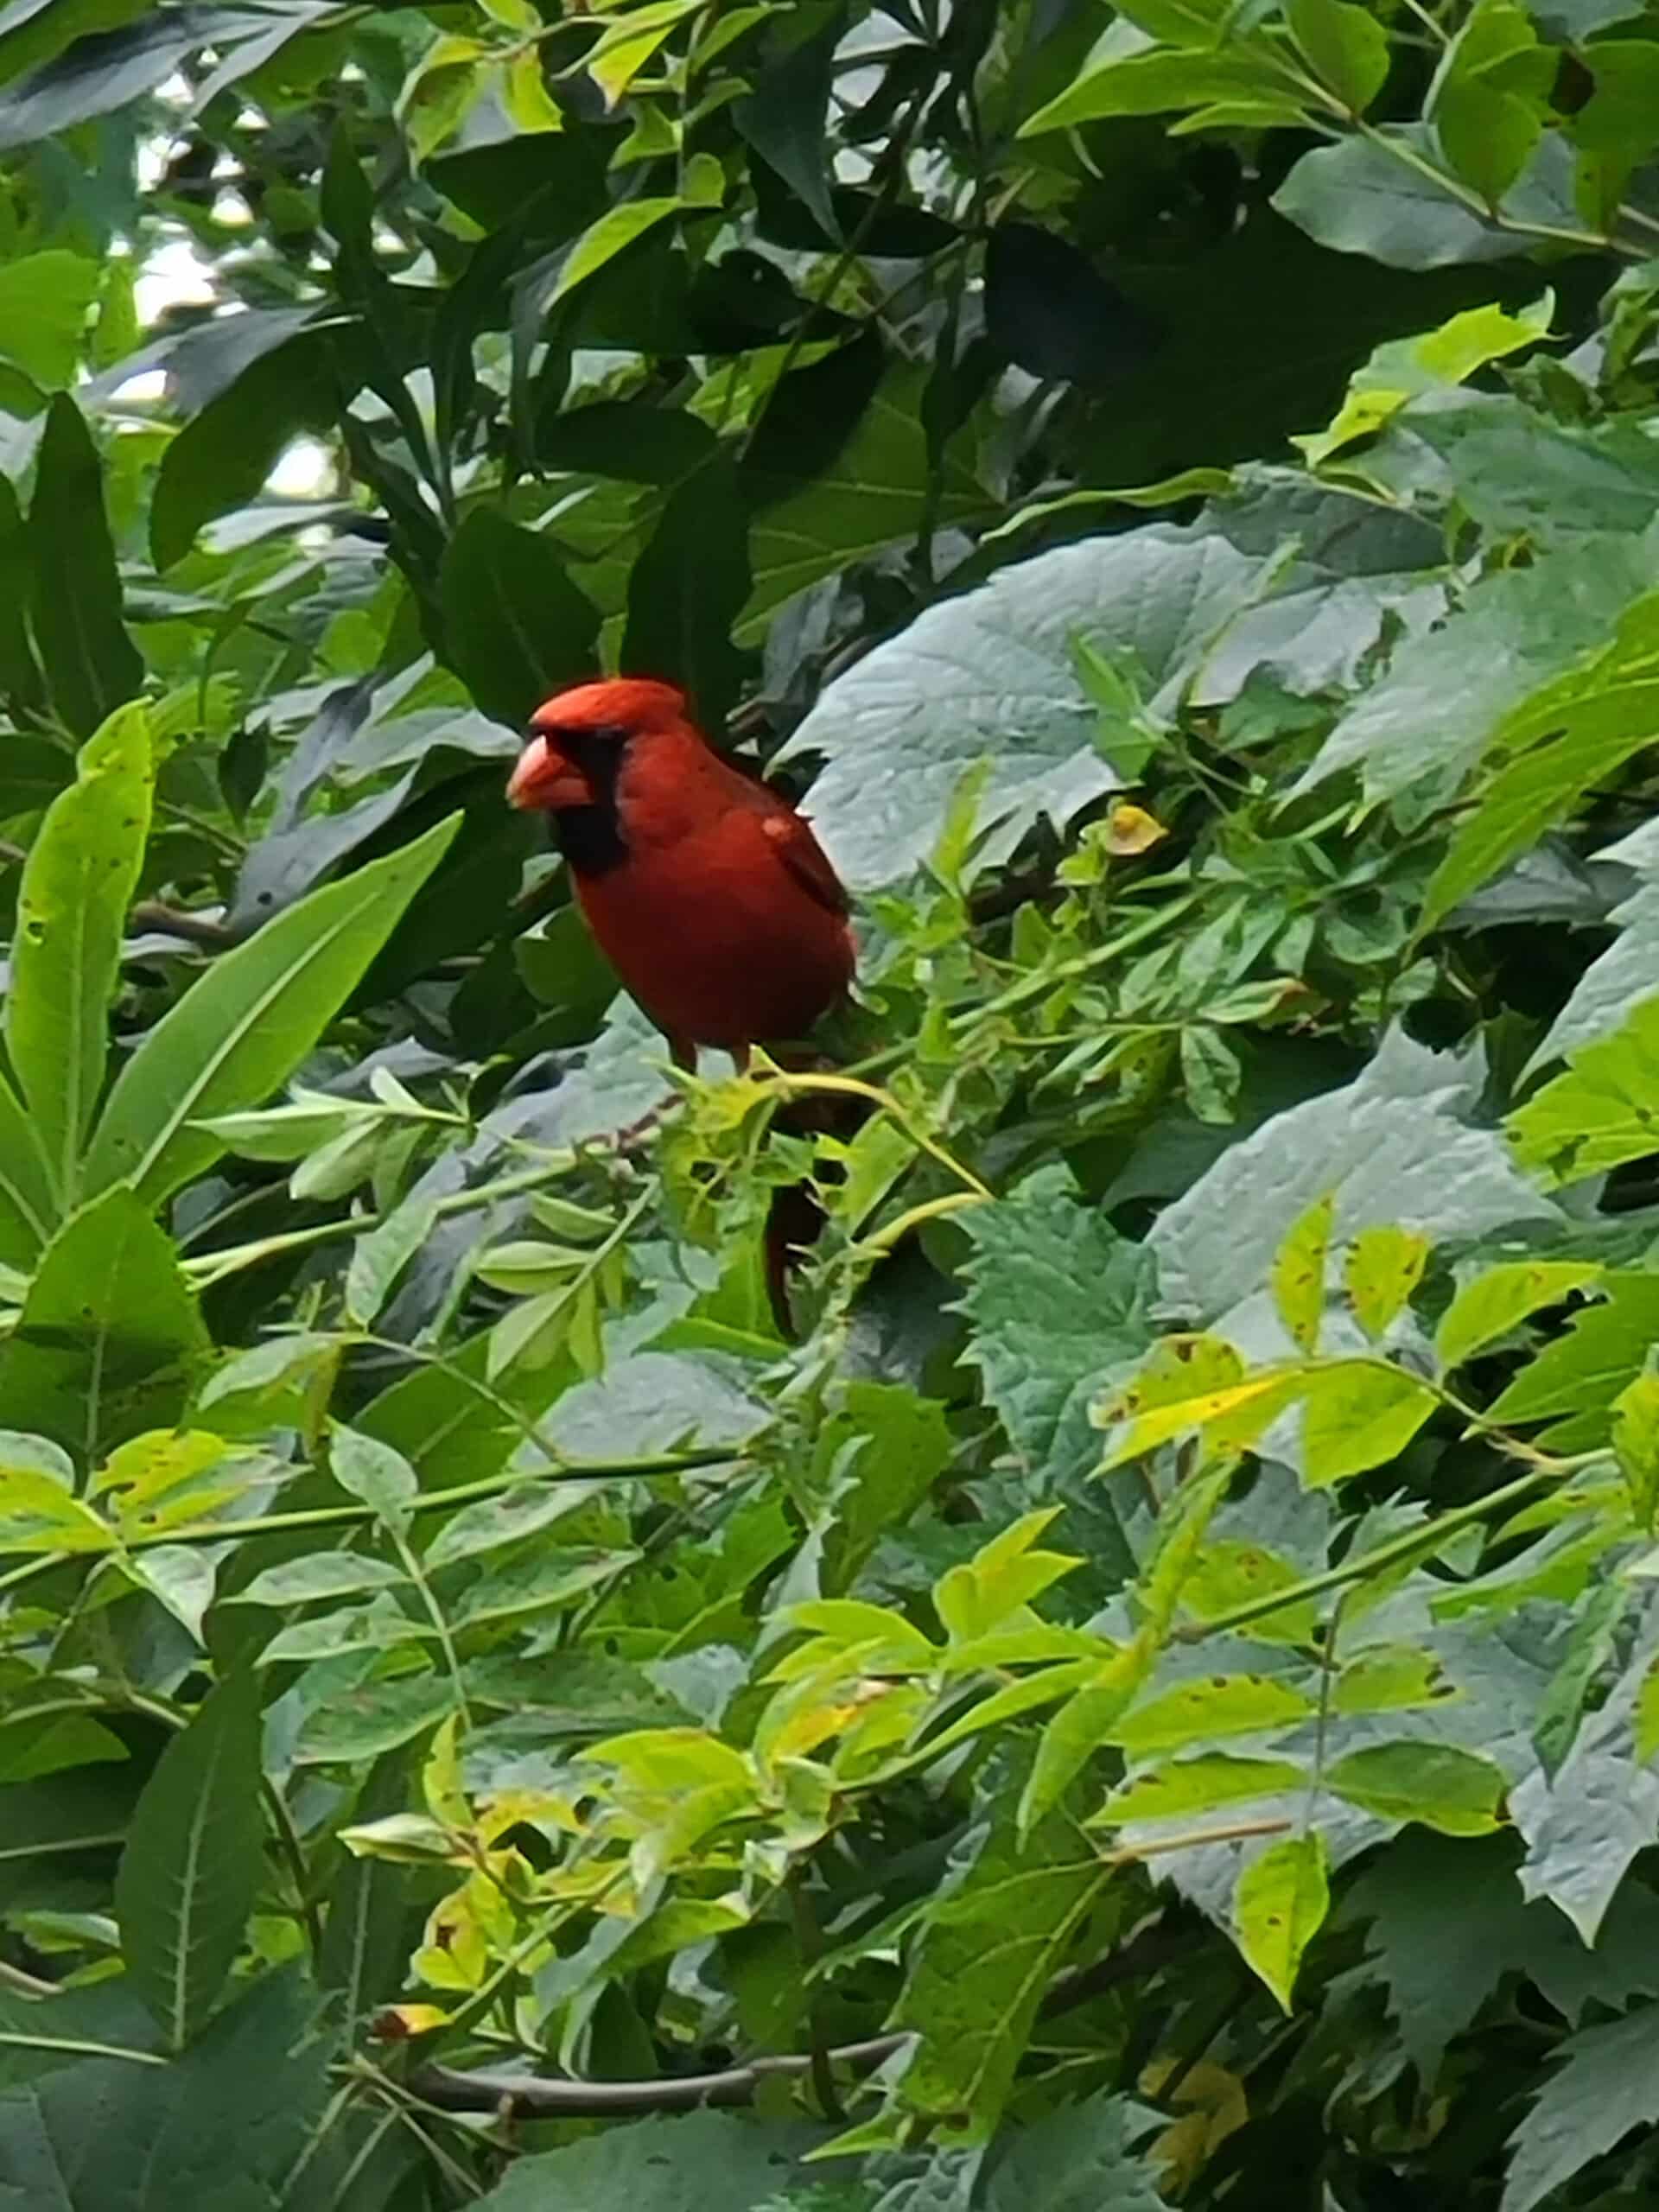 A red cardinal in a tree.